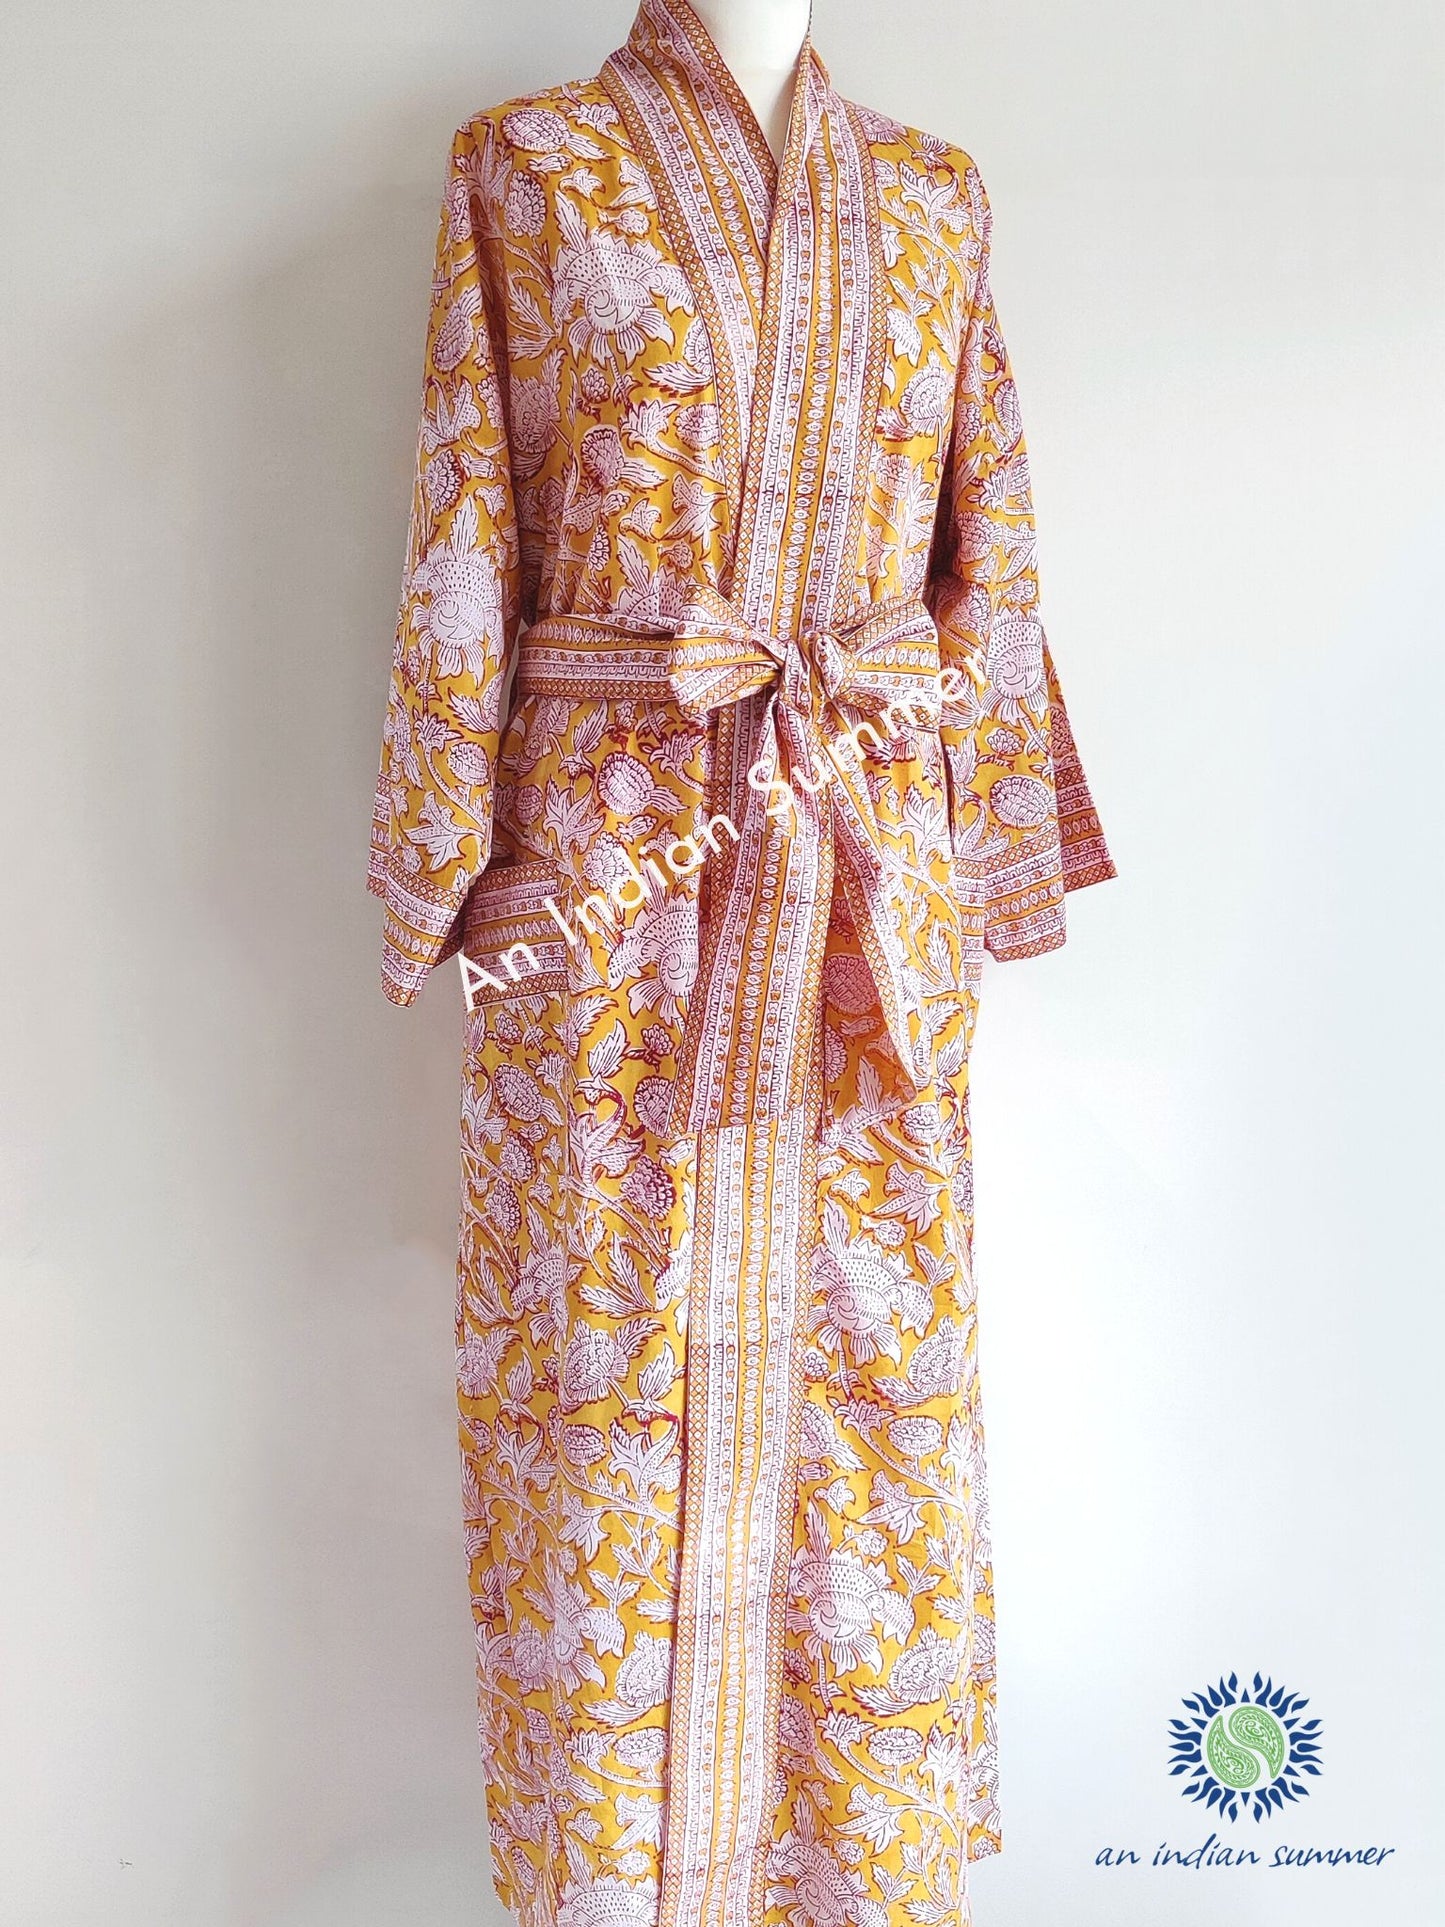 Long Kimono Robe | Thistle | Amber | Botanical Block Print | Hand Block Printed | Cotton Voile | An Indian Summer | Seasonless Timeless Sustainable Ethical Authentic Artisan Conscious Clothing Lifestyle Brand